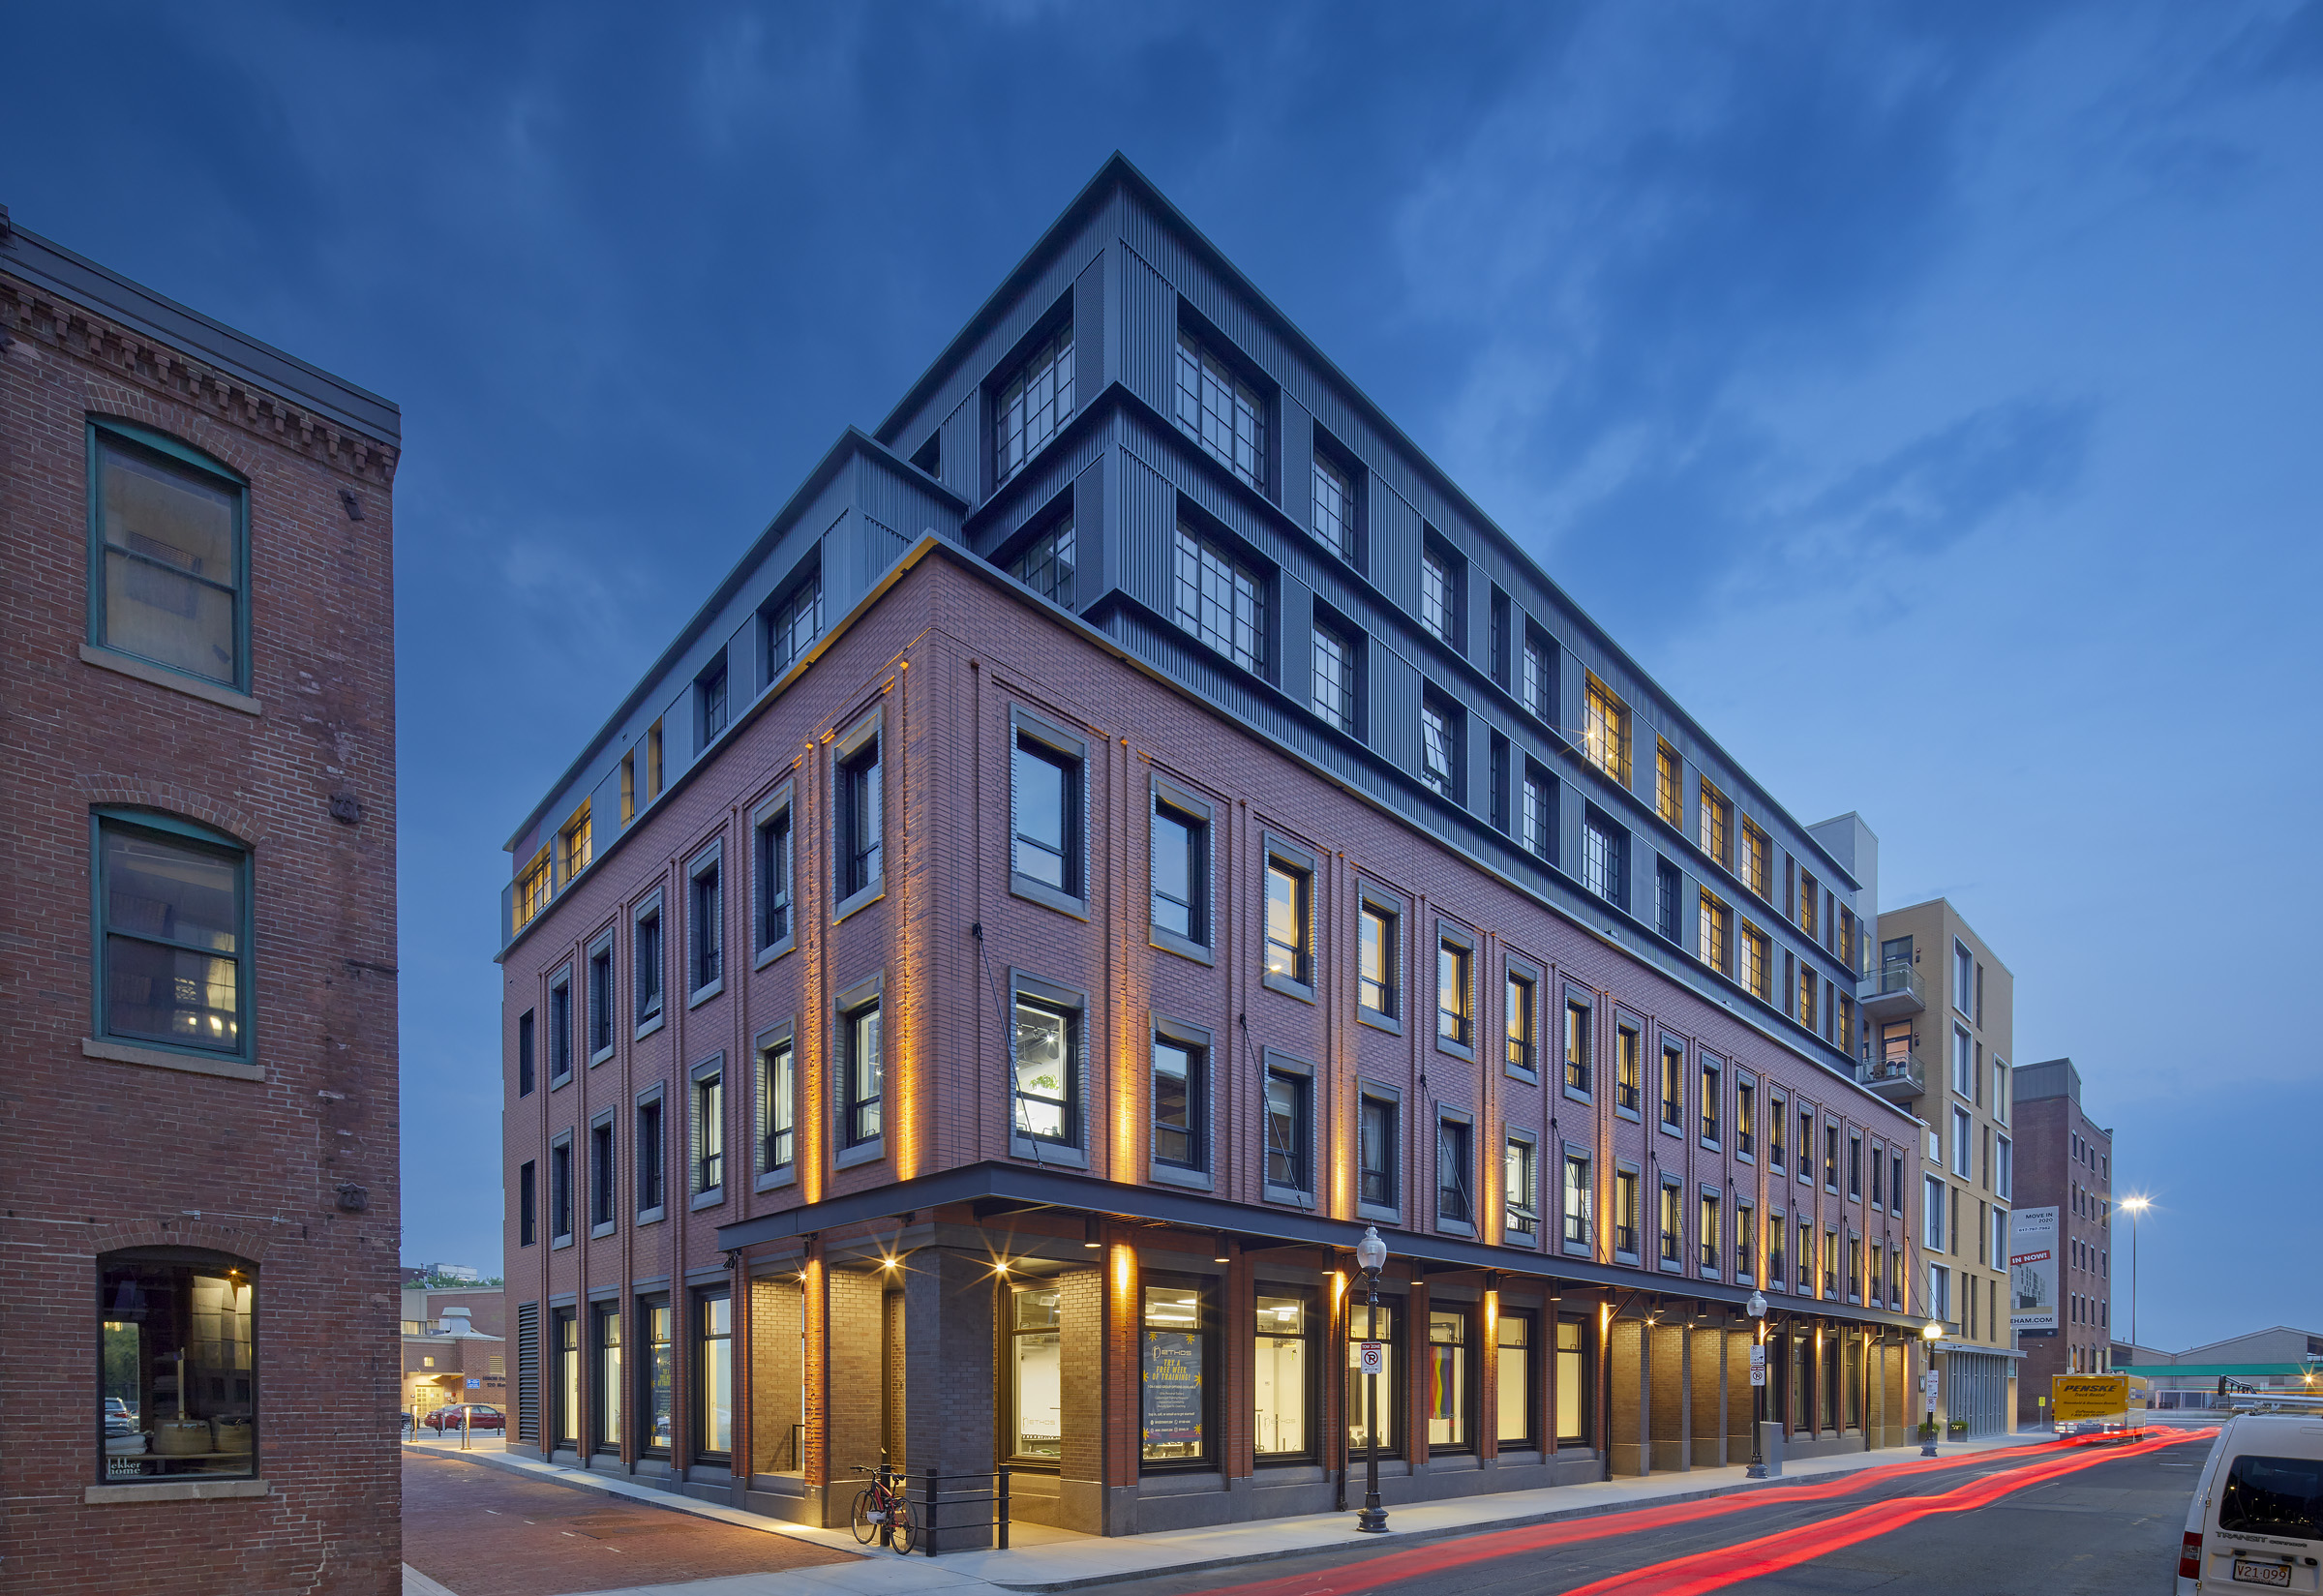 The Factory Lofts Win Brick in Architecture Awards, Featured in ArchDaily + Archello